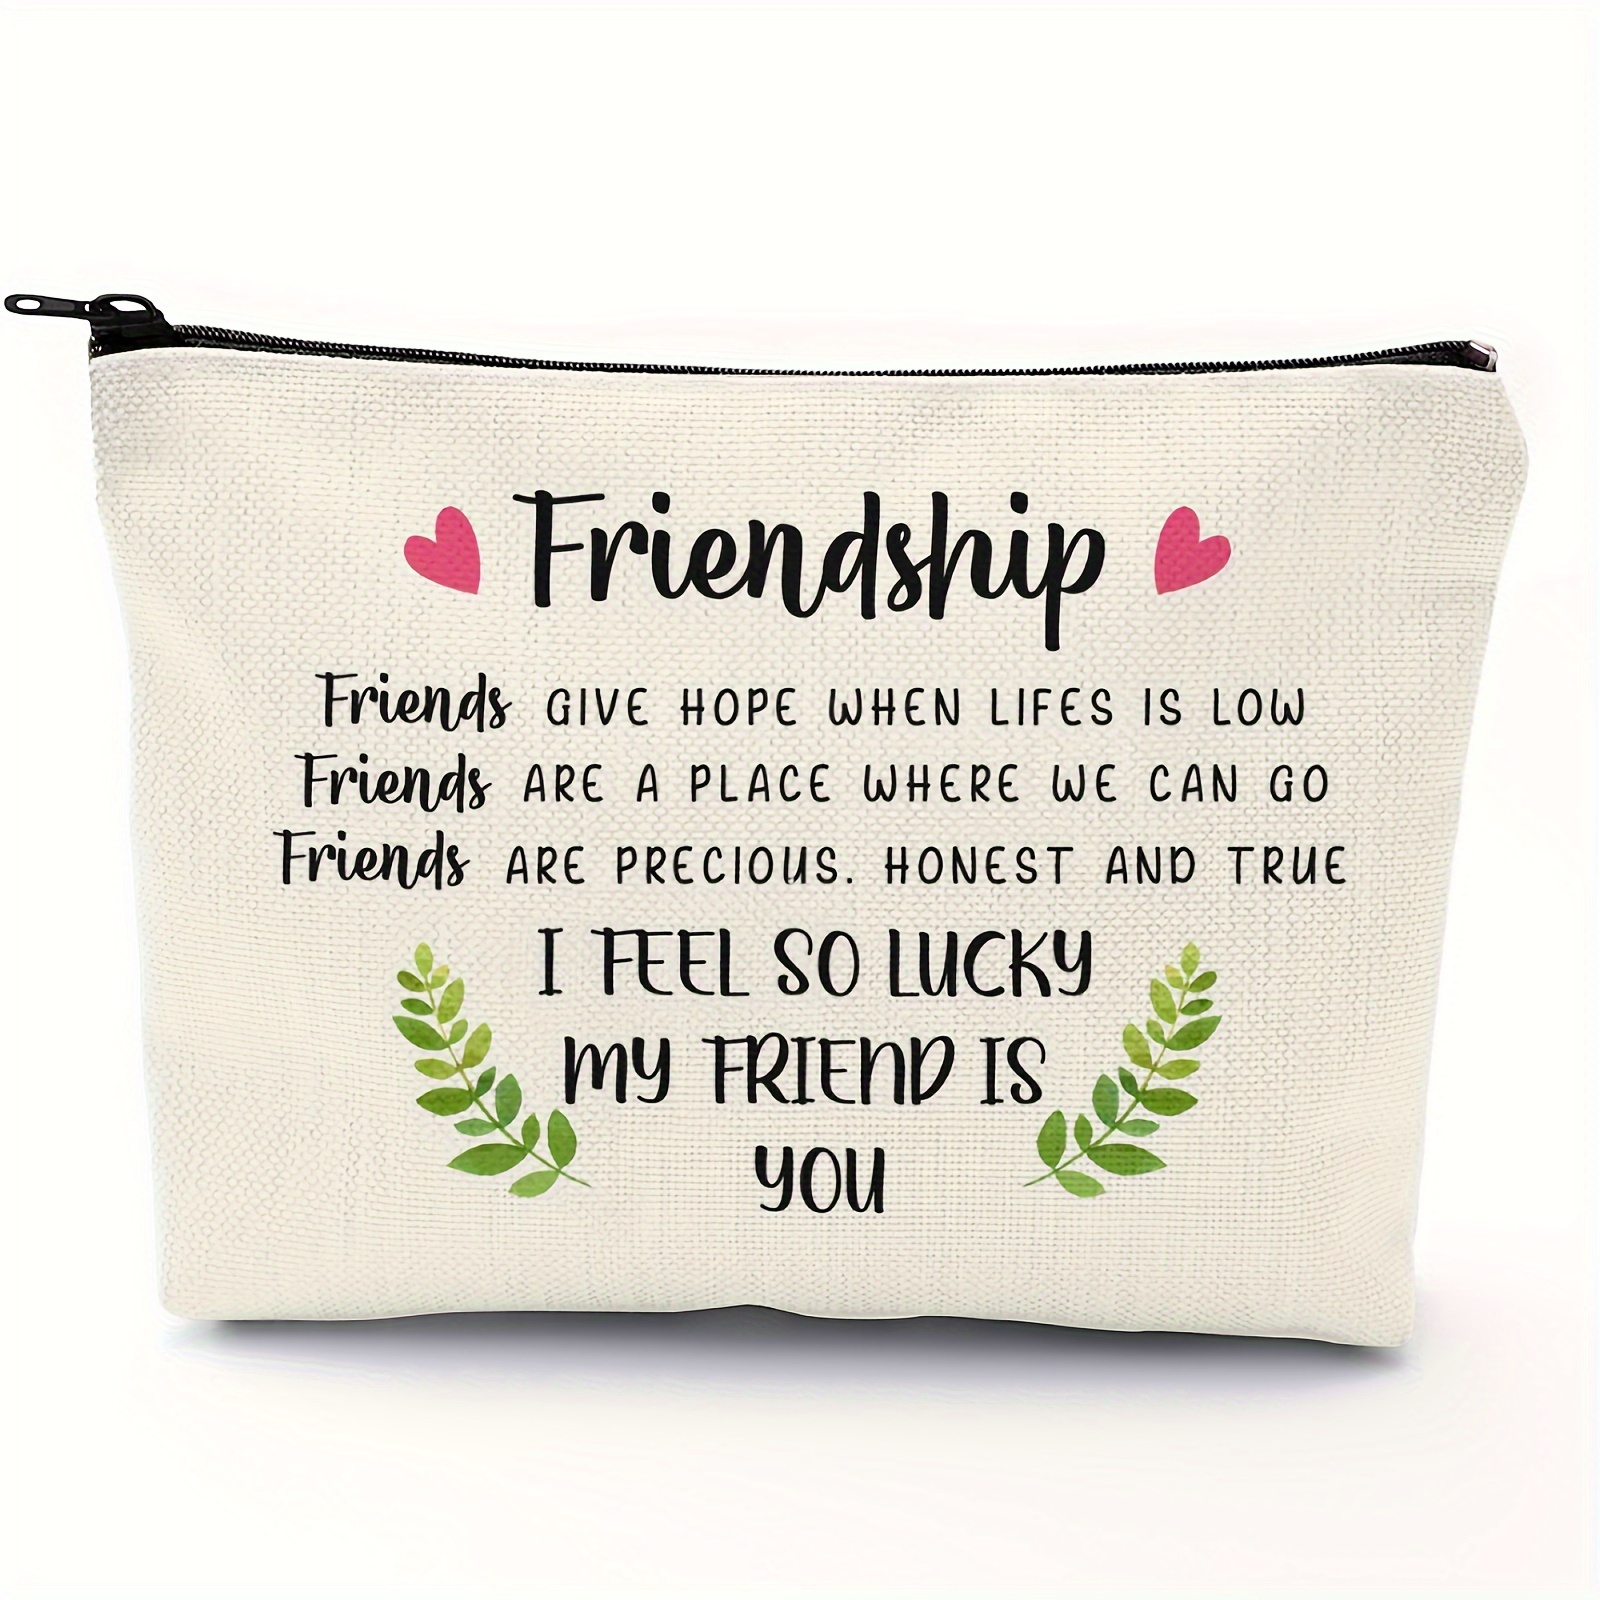 

Friendship Cosmetic Bag Makeup Bag Weekend Gifts Friends Makeup Bag For Christmas Friendship Present Travel Pouch Friend Bff Gifts For Women Honeymoon Birthday (leaf Pattern)